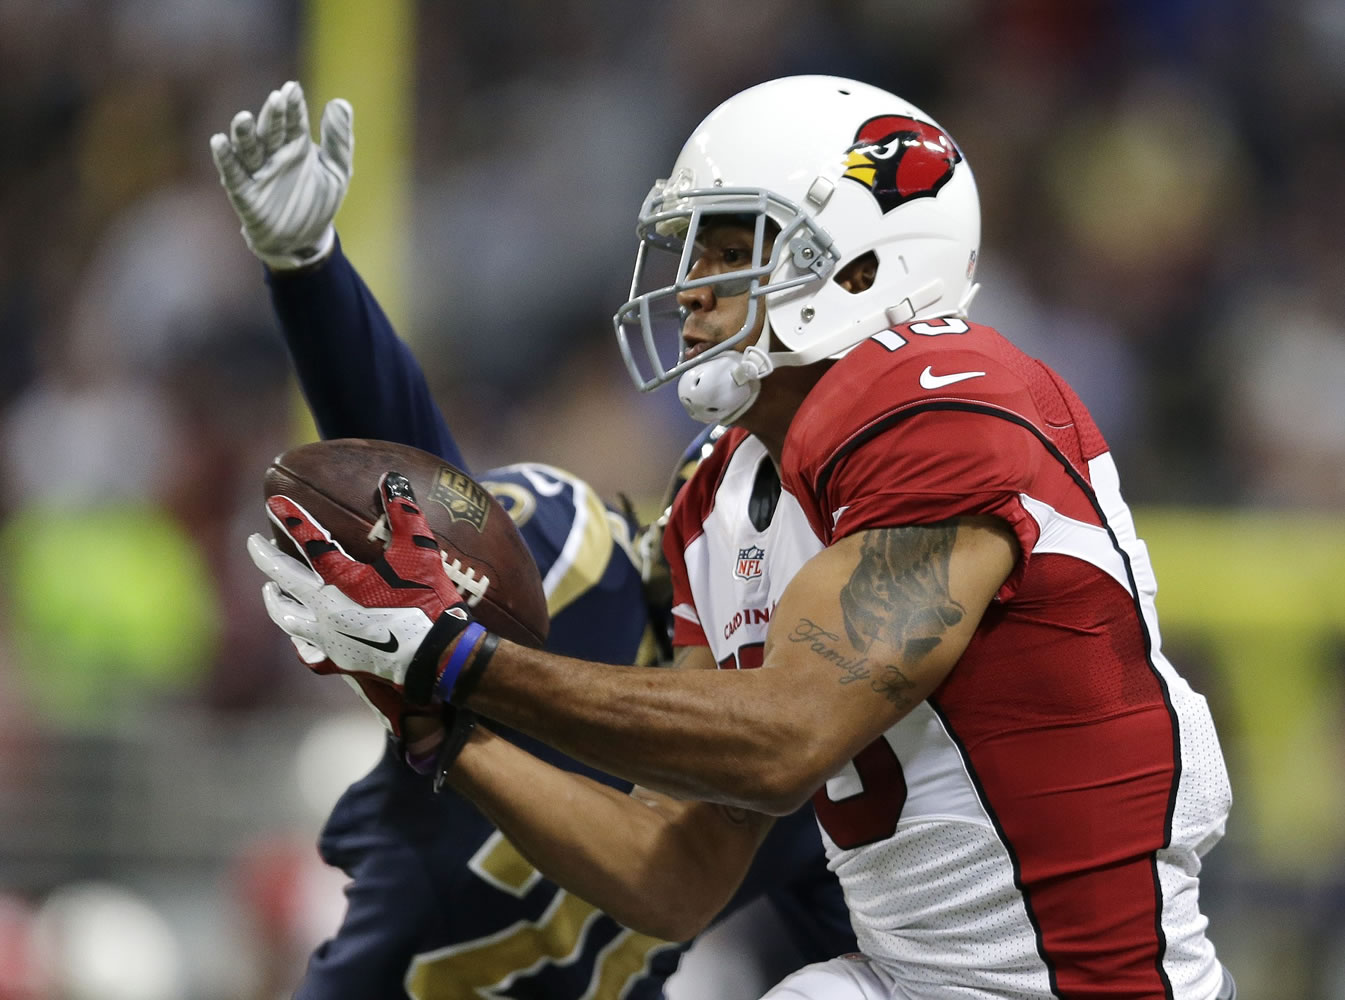 Arizona Cardinals wide receiver Michael Floyd (15) makes a catch against St. Louis Rams' Janoris Jenkins (21) during the first half Thursday, Dec. 11, 2014 in St. Louis.